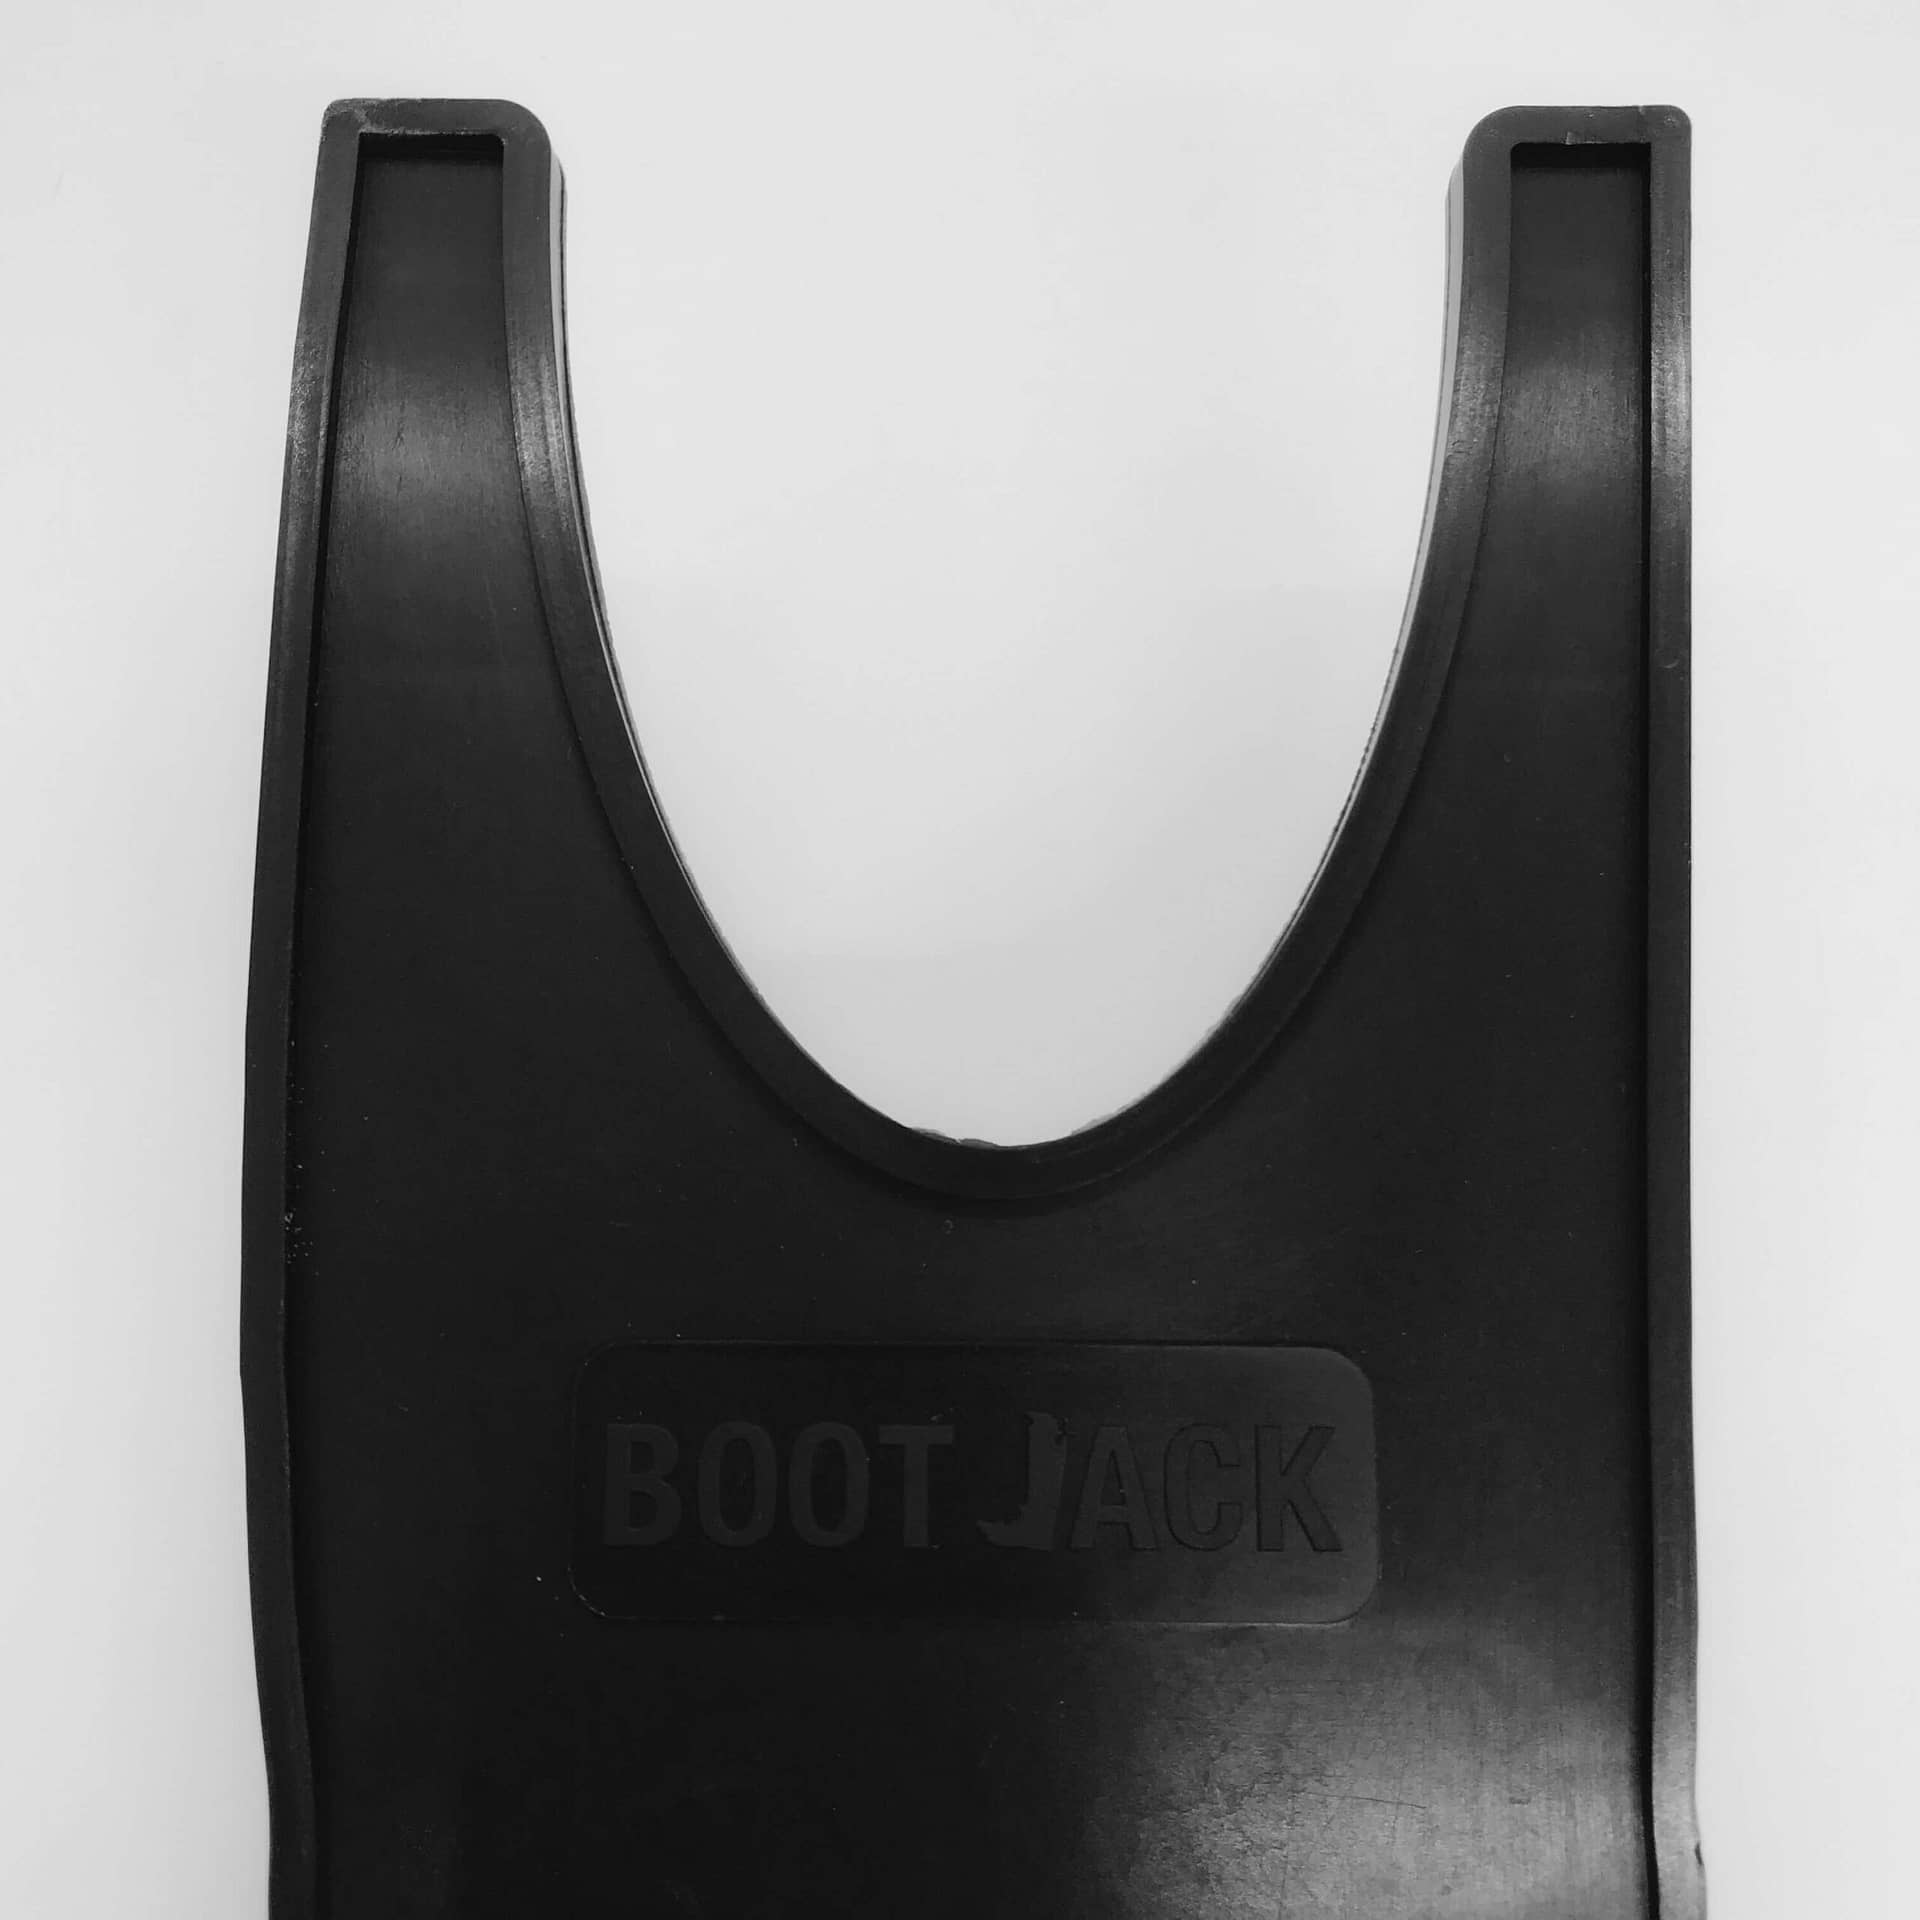 Boot Jack for Wellies/Walking/Riding Boot Remover Puller Portable Remove Muddy Boots Effortlessly 